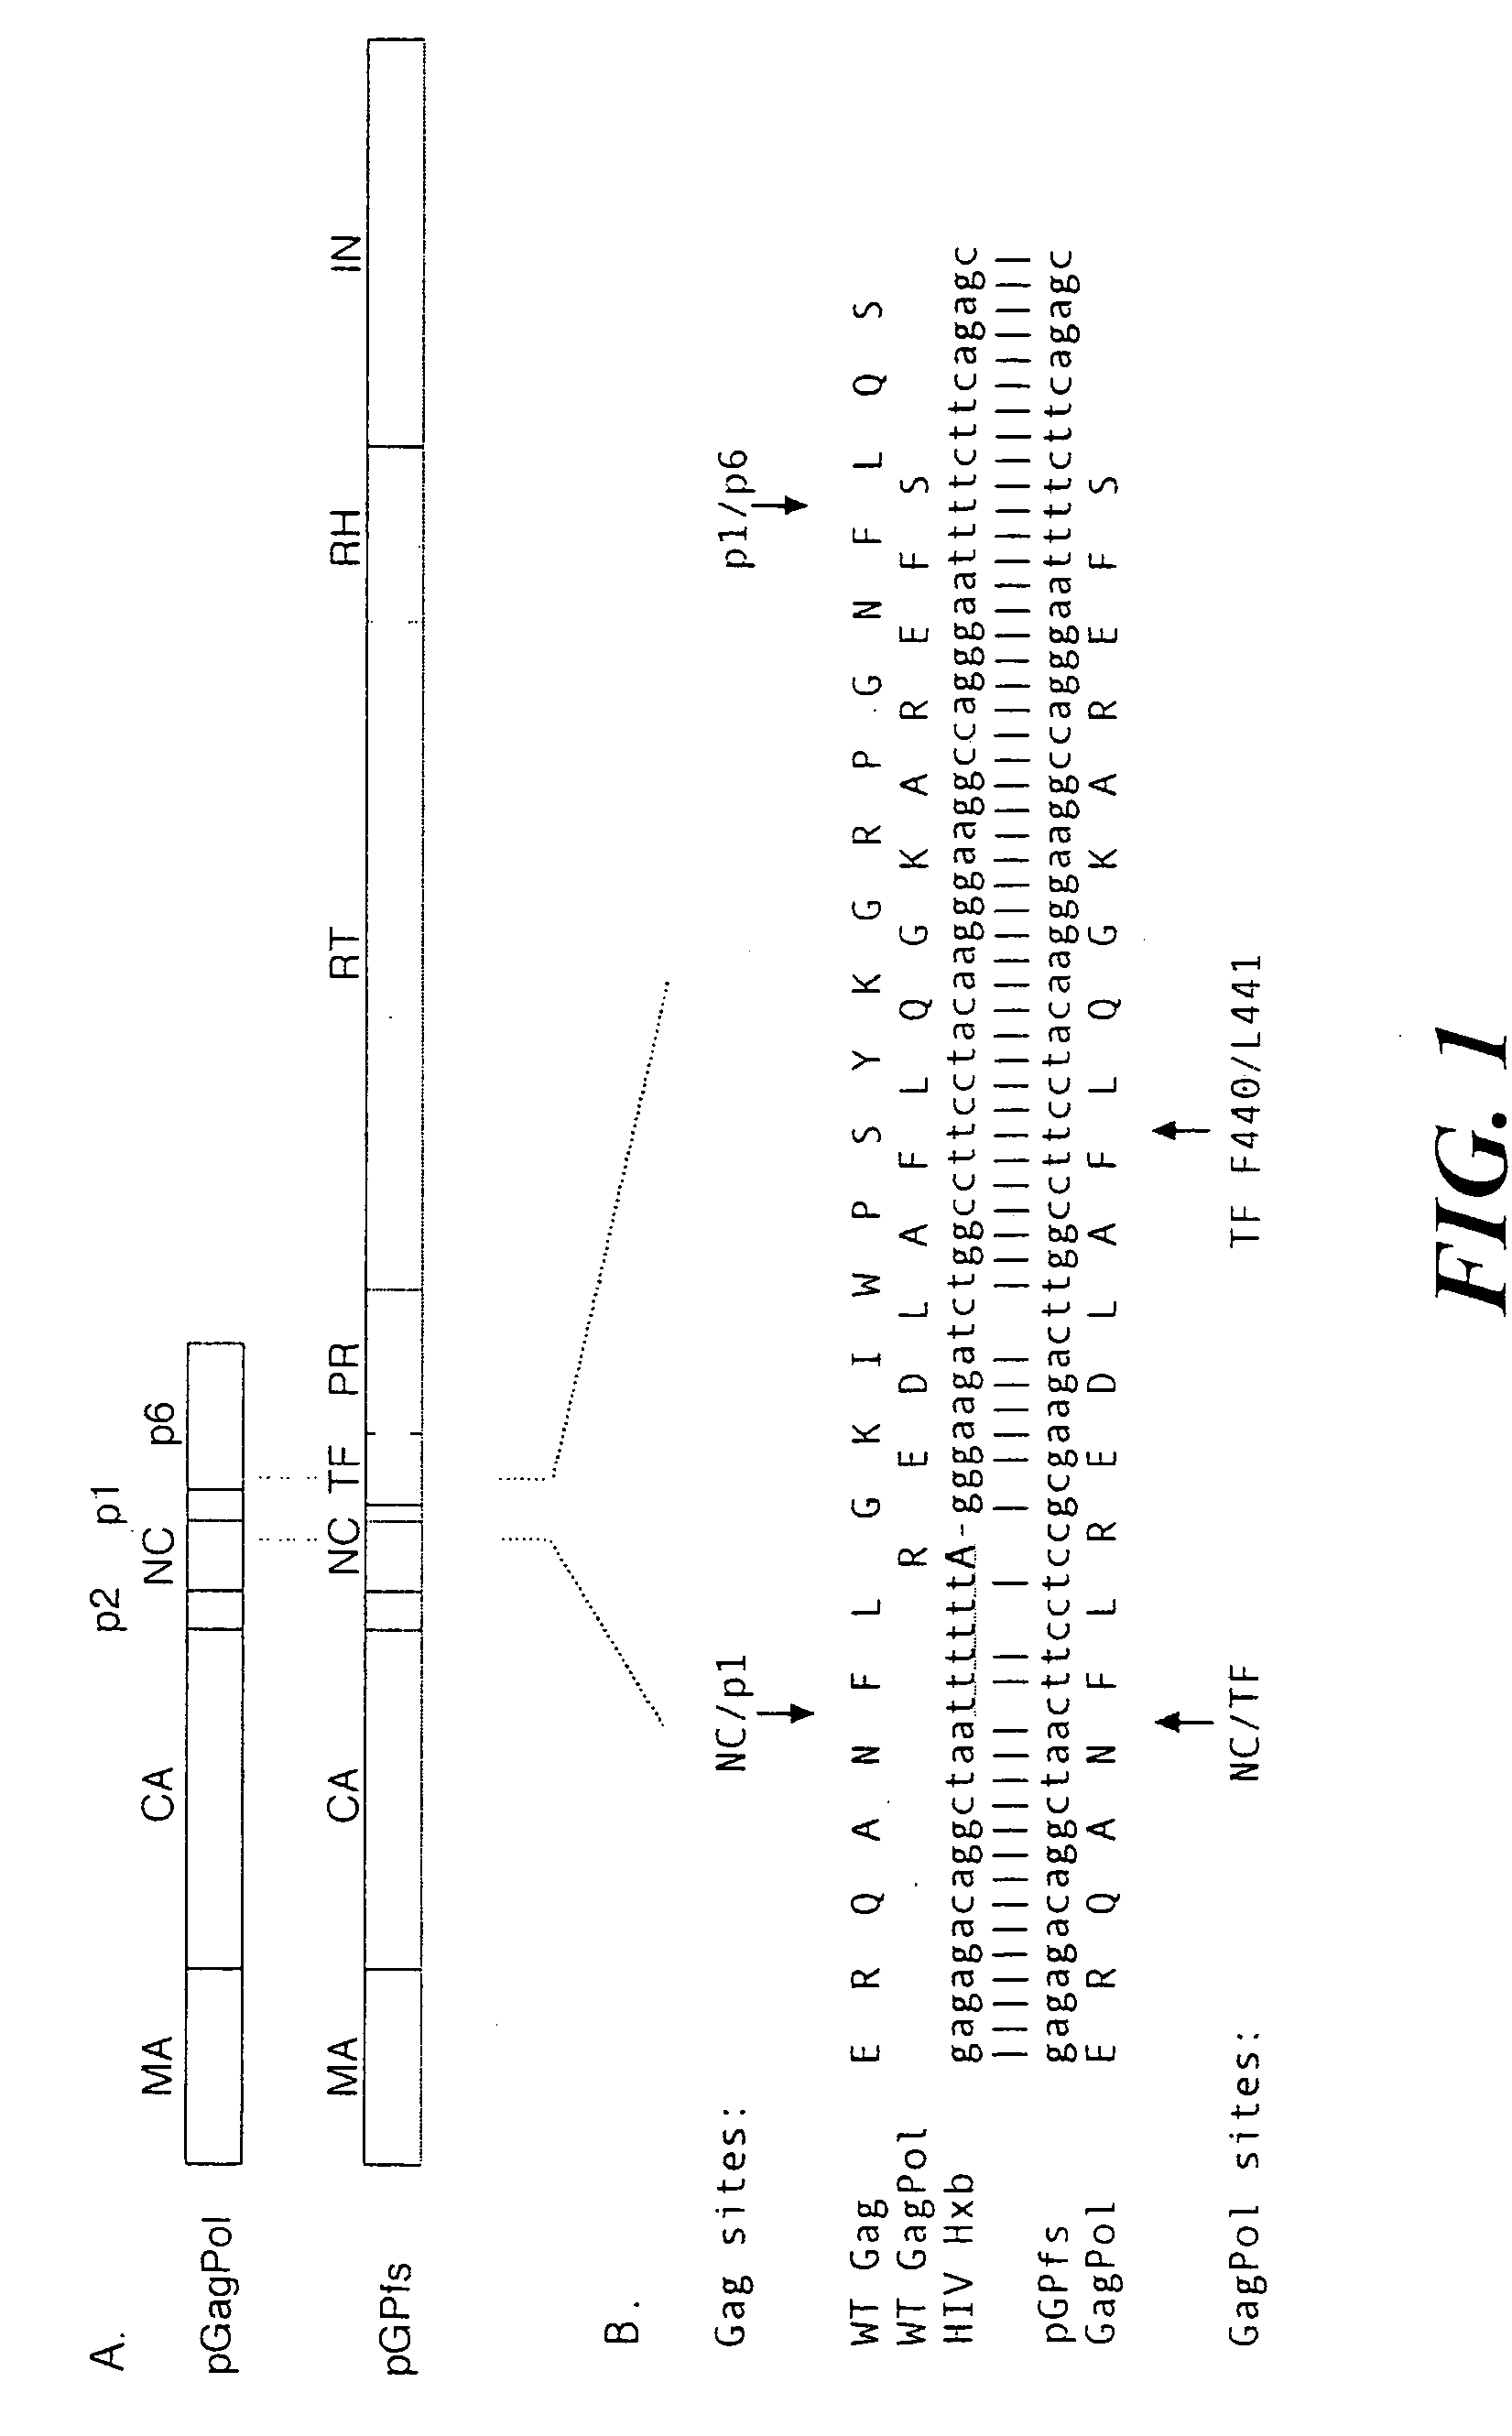 Methods and reagents for identifying inhibitors of viral protease activity